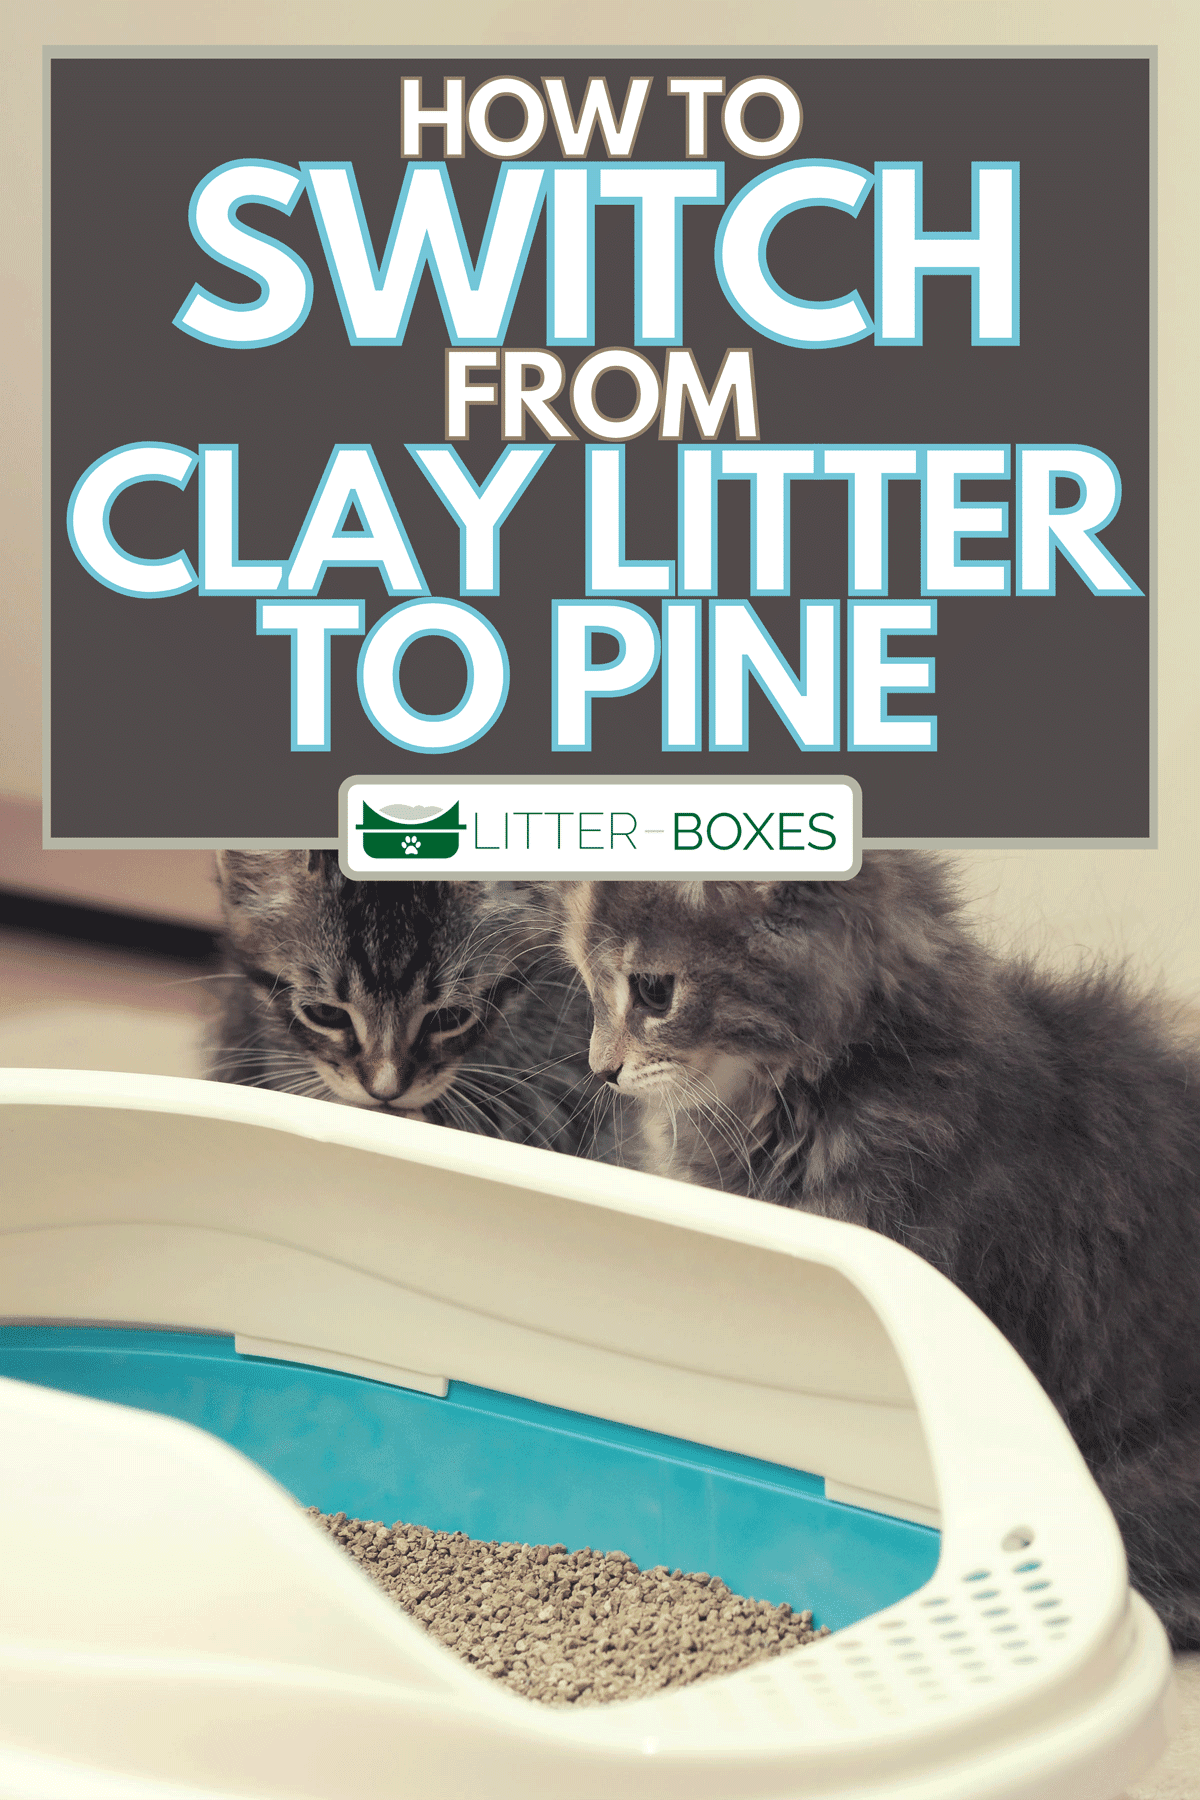 The two cute kittens are sitting near their litter box, How To Switch From Clay Litter to Pine